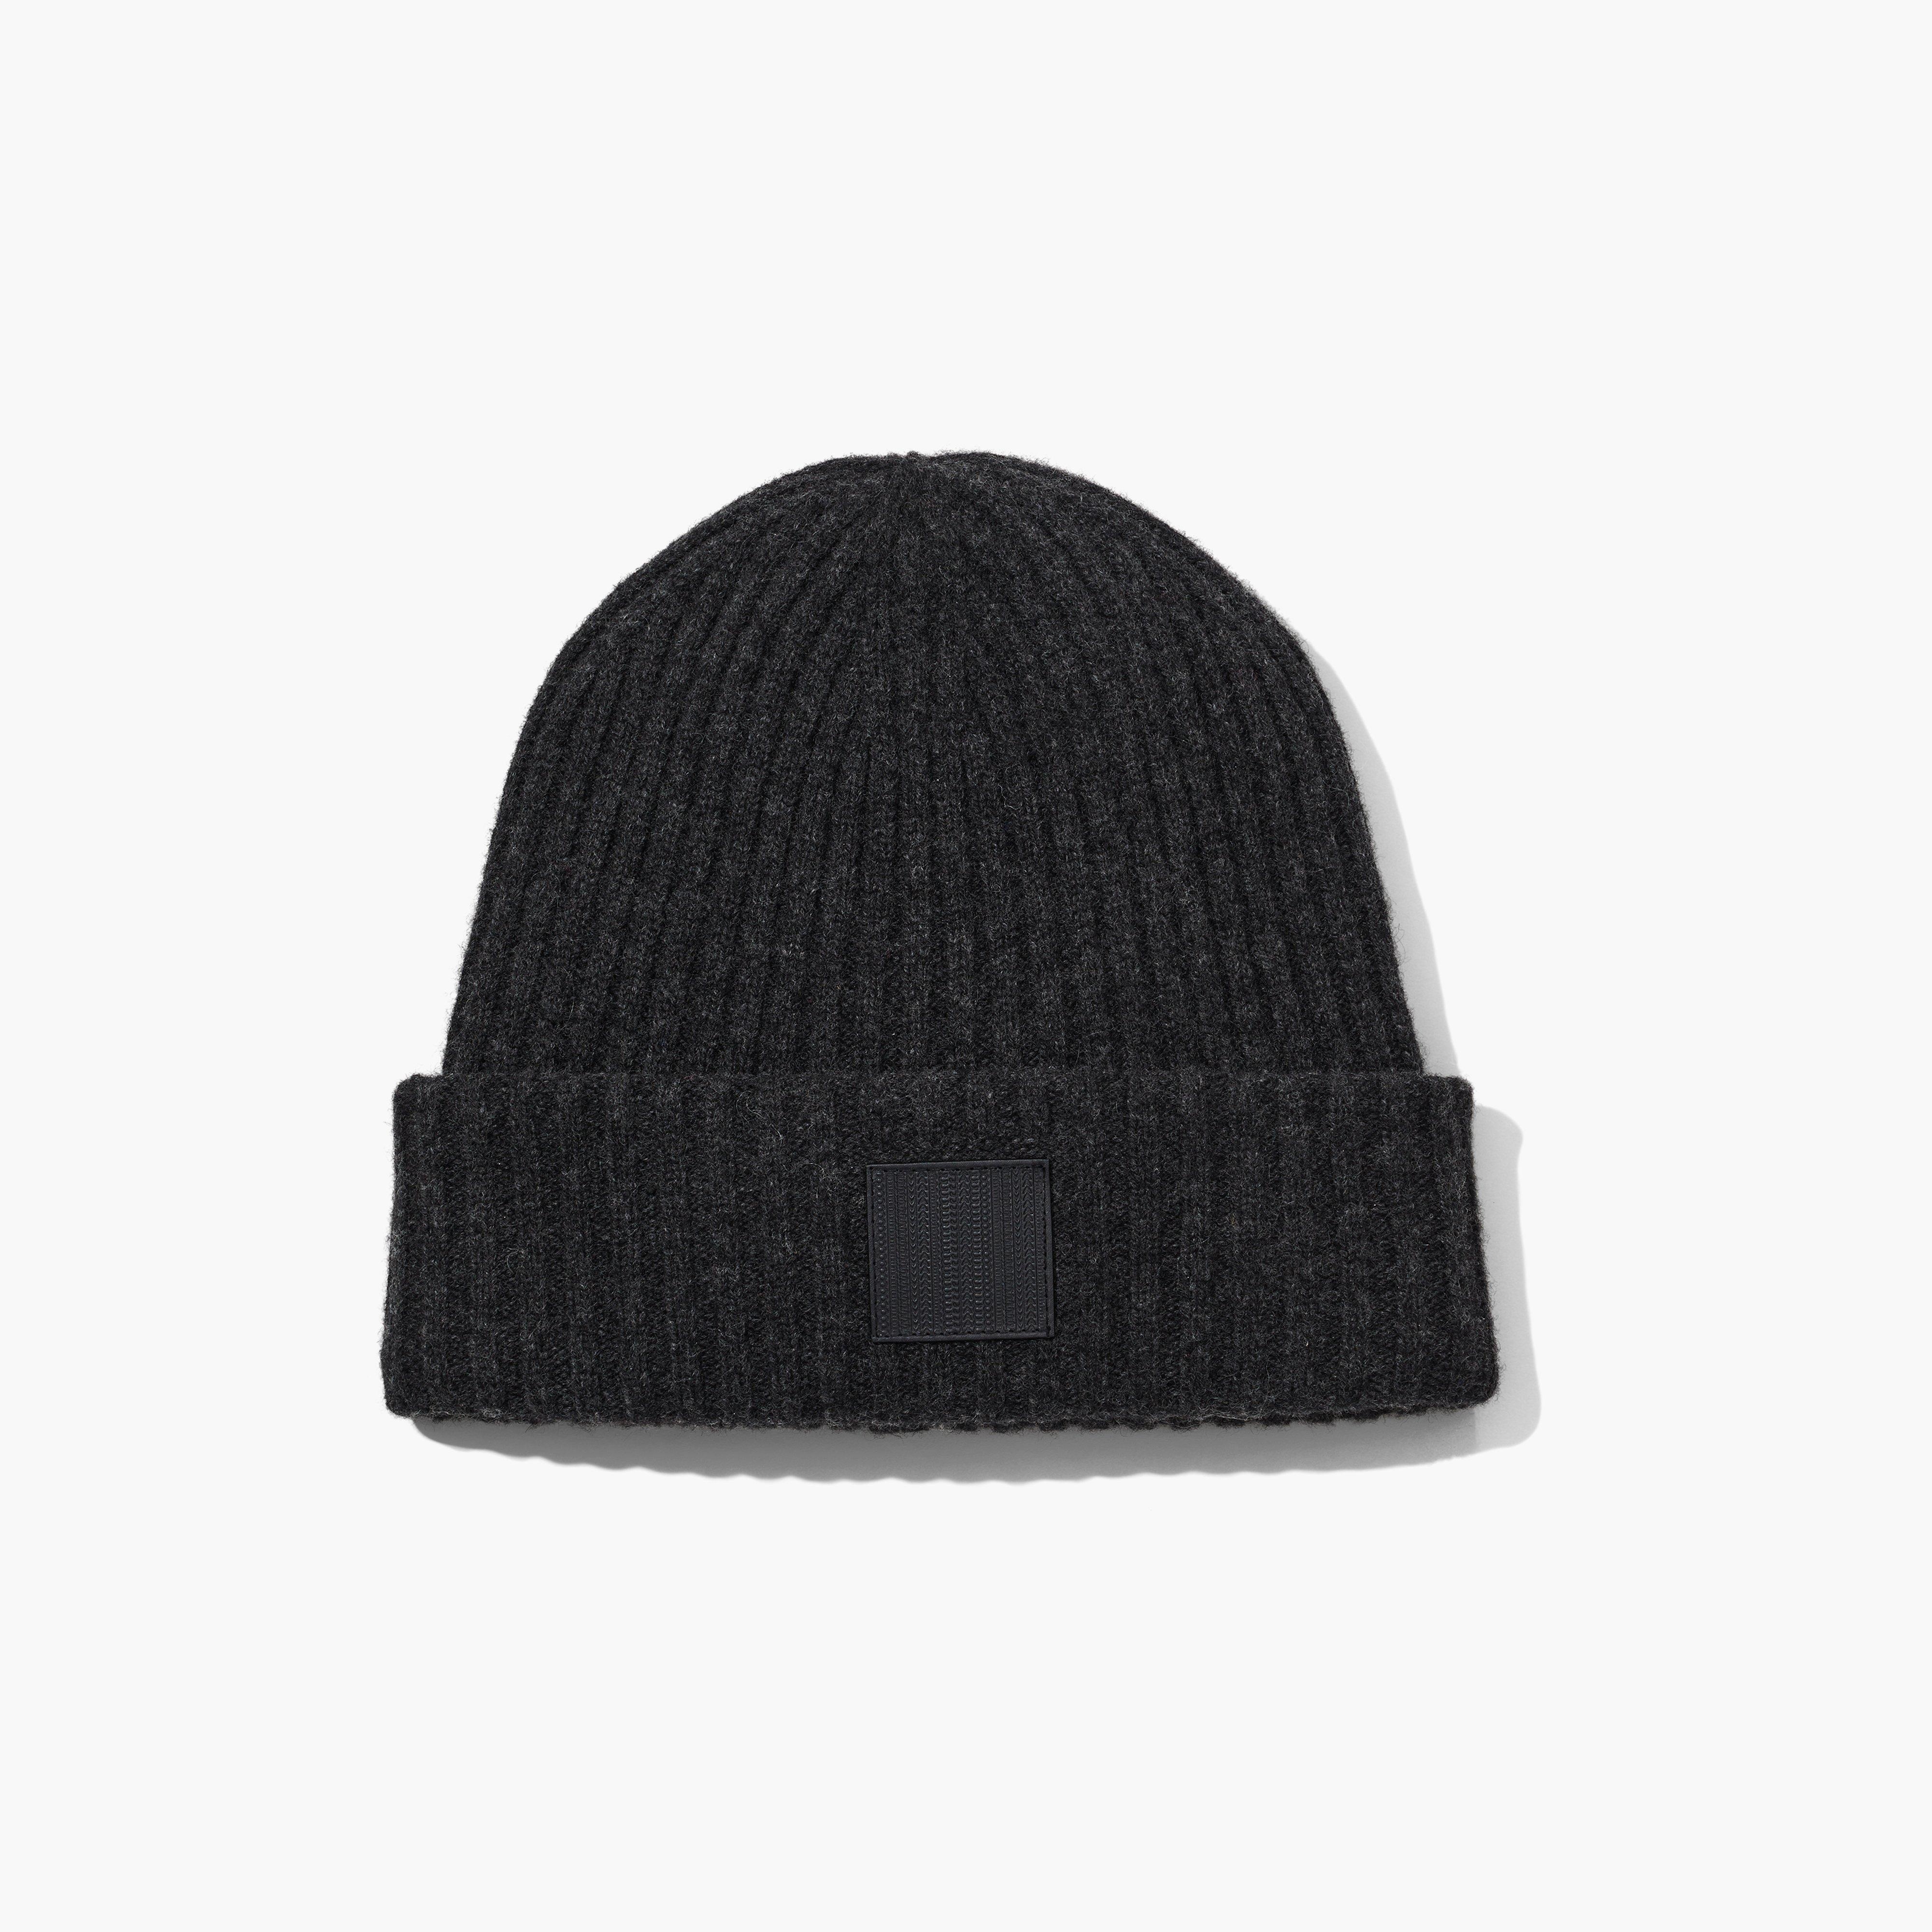 THE RIBBED BEANIE - 1